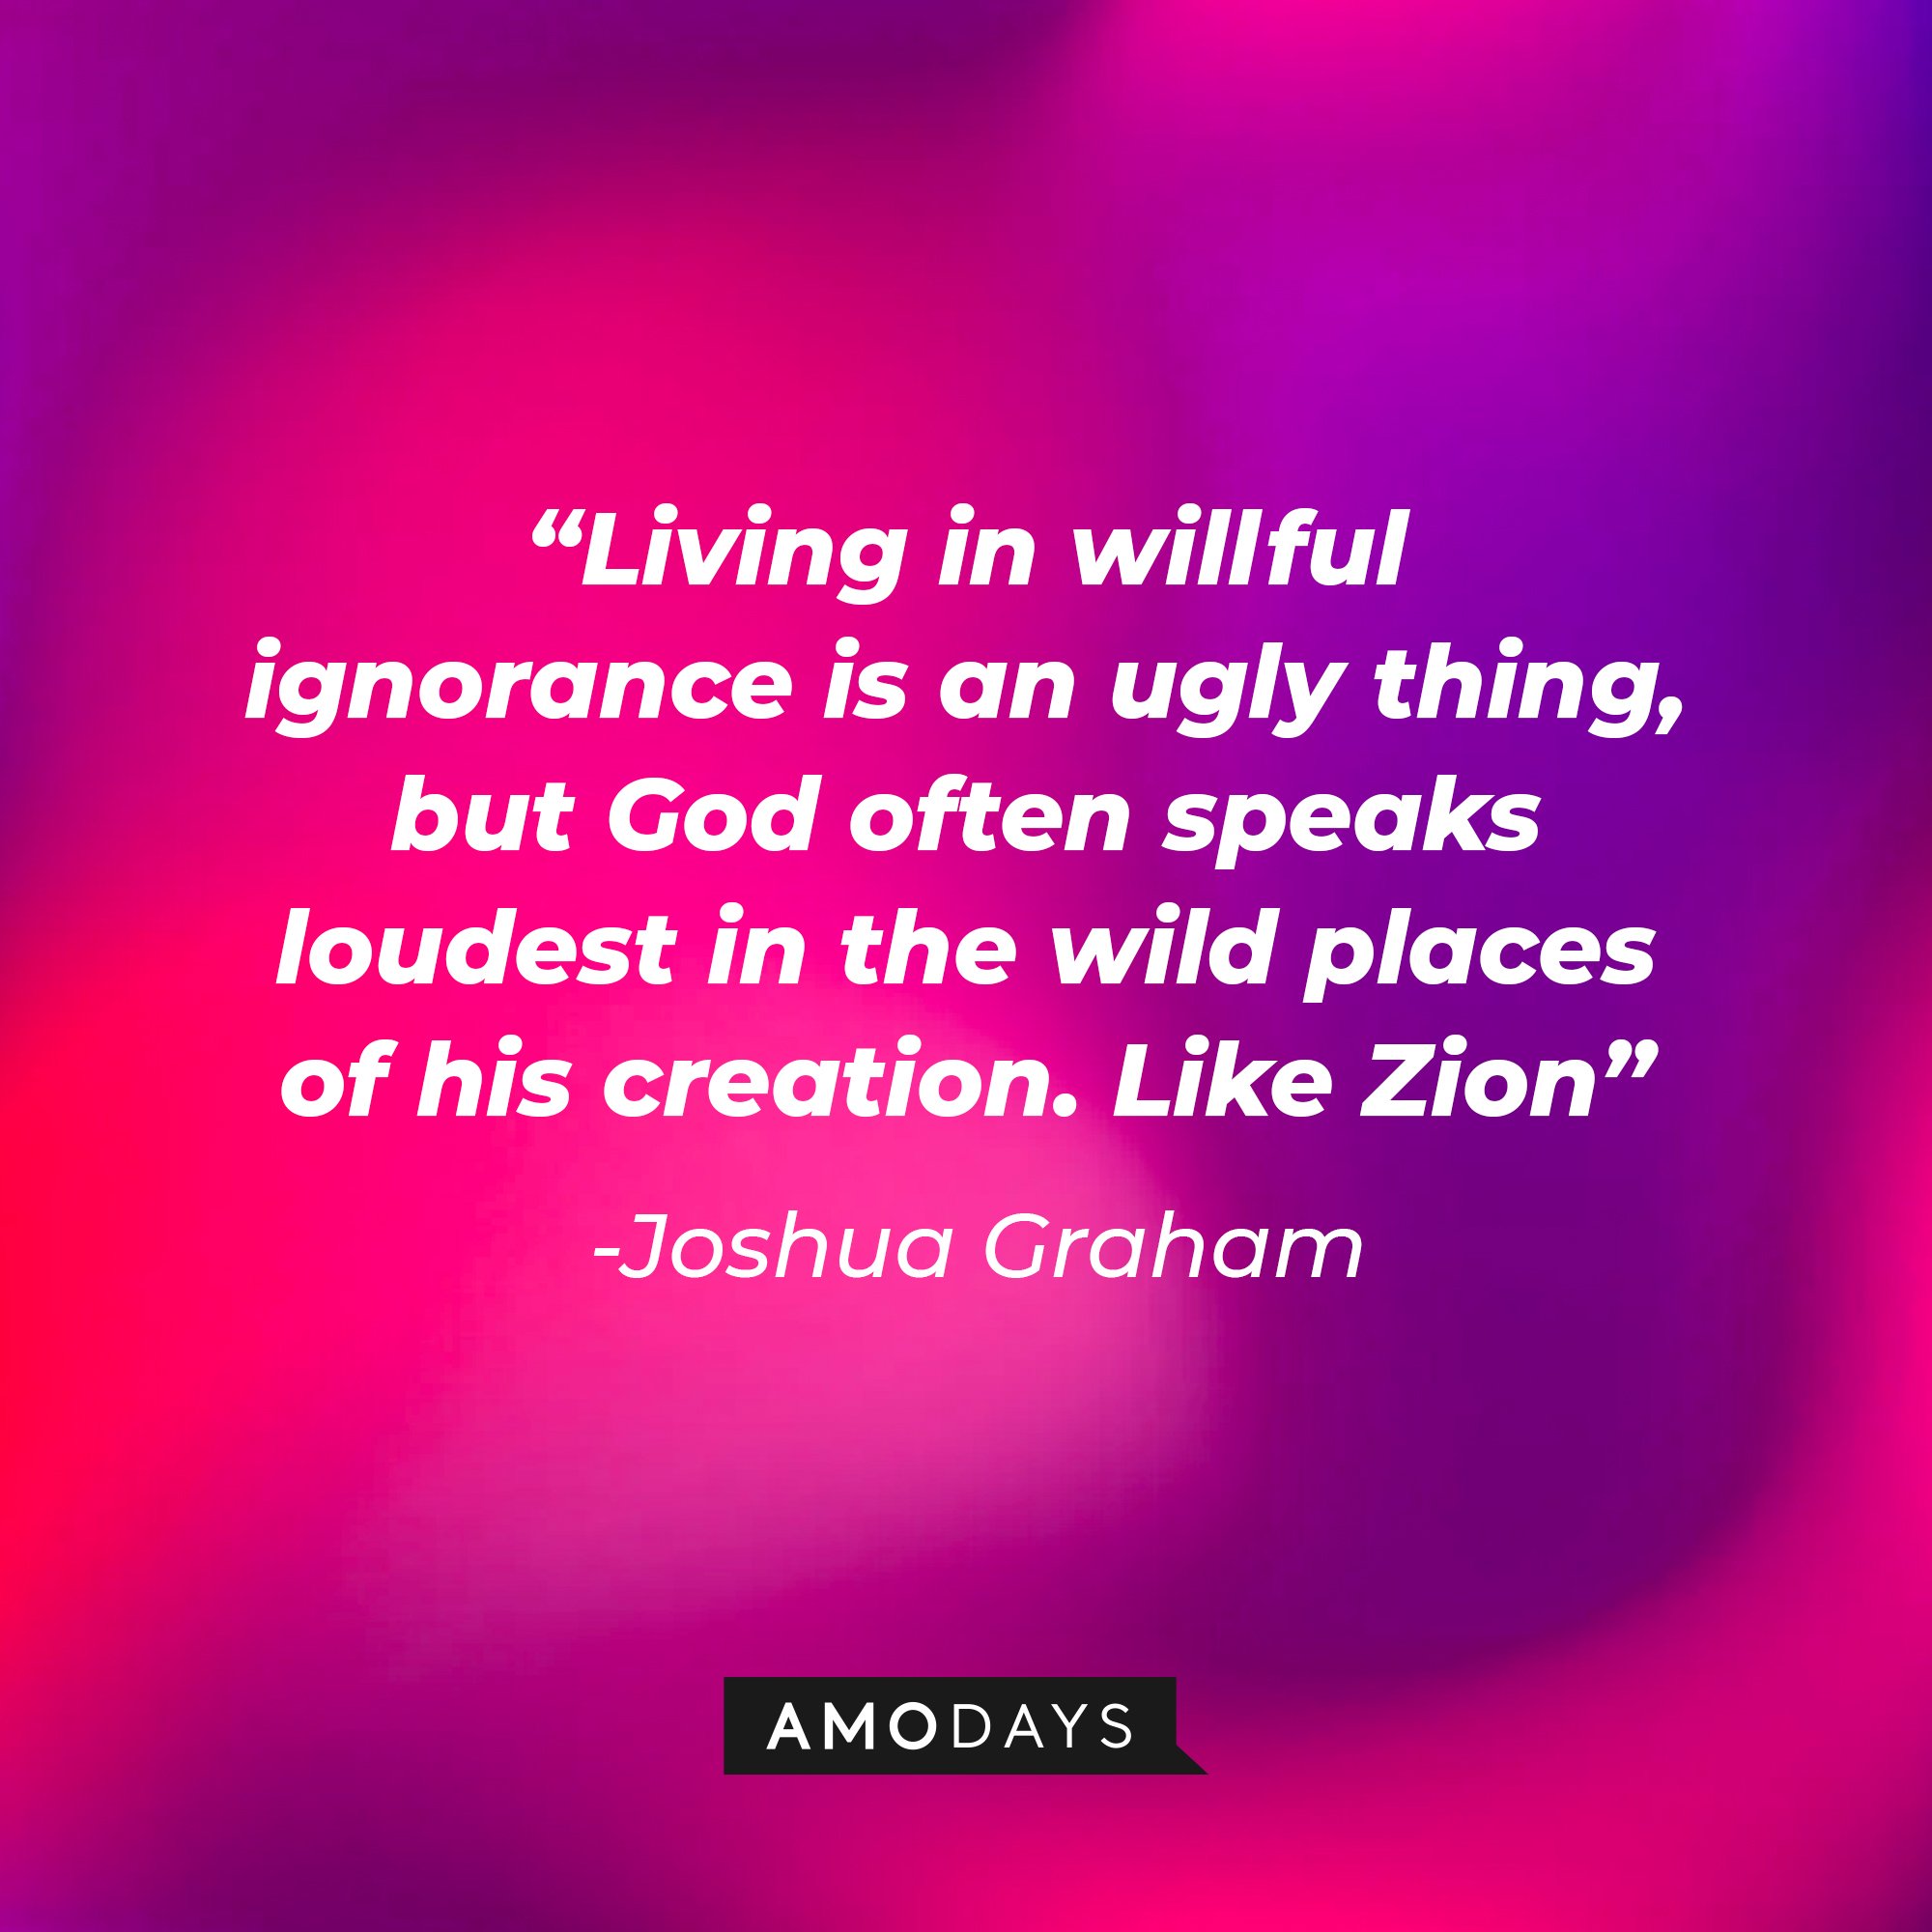 Joshua Graham's quote: "Living in willful ignorance is an ugly thing, but God often speaks loudest in the wild places of his creation. Like Zion" | Source: Amodays